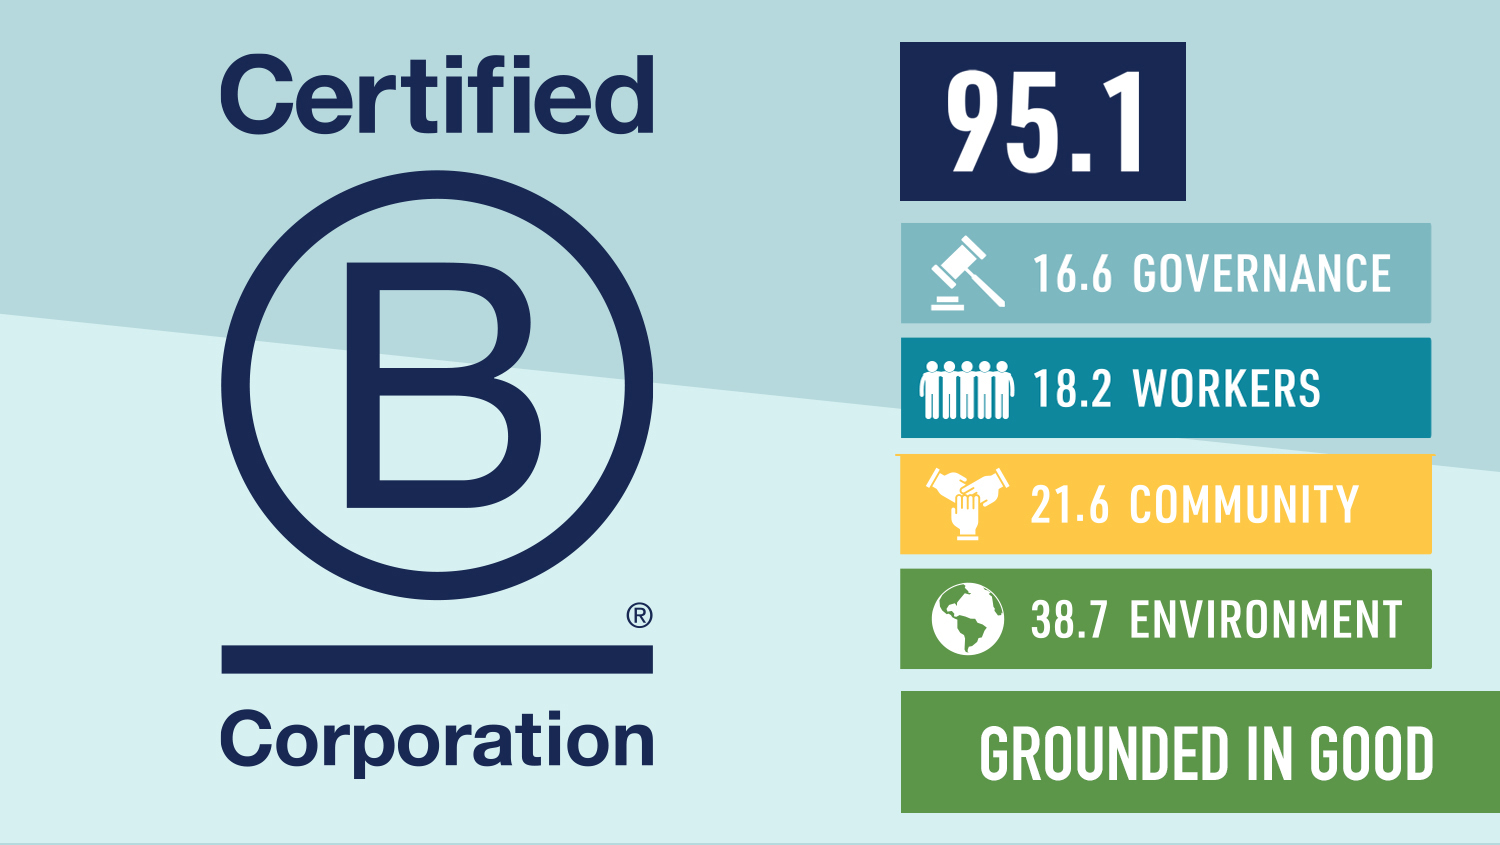 Nonprofit B Lab’s B Impact Assessment (BIA) allows us to transparently measure our impact. Our latest assessment and score are a roadmap for improvement, and let us clearly show others how we’re doing.